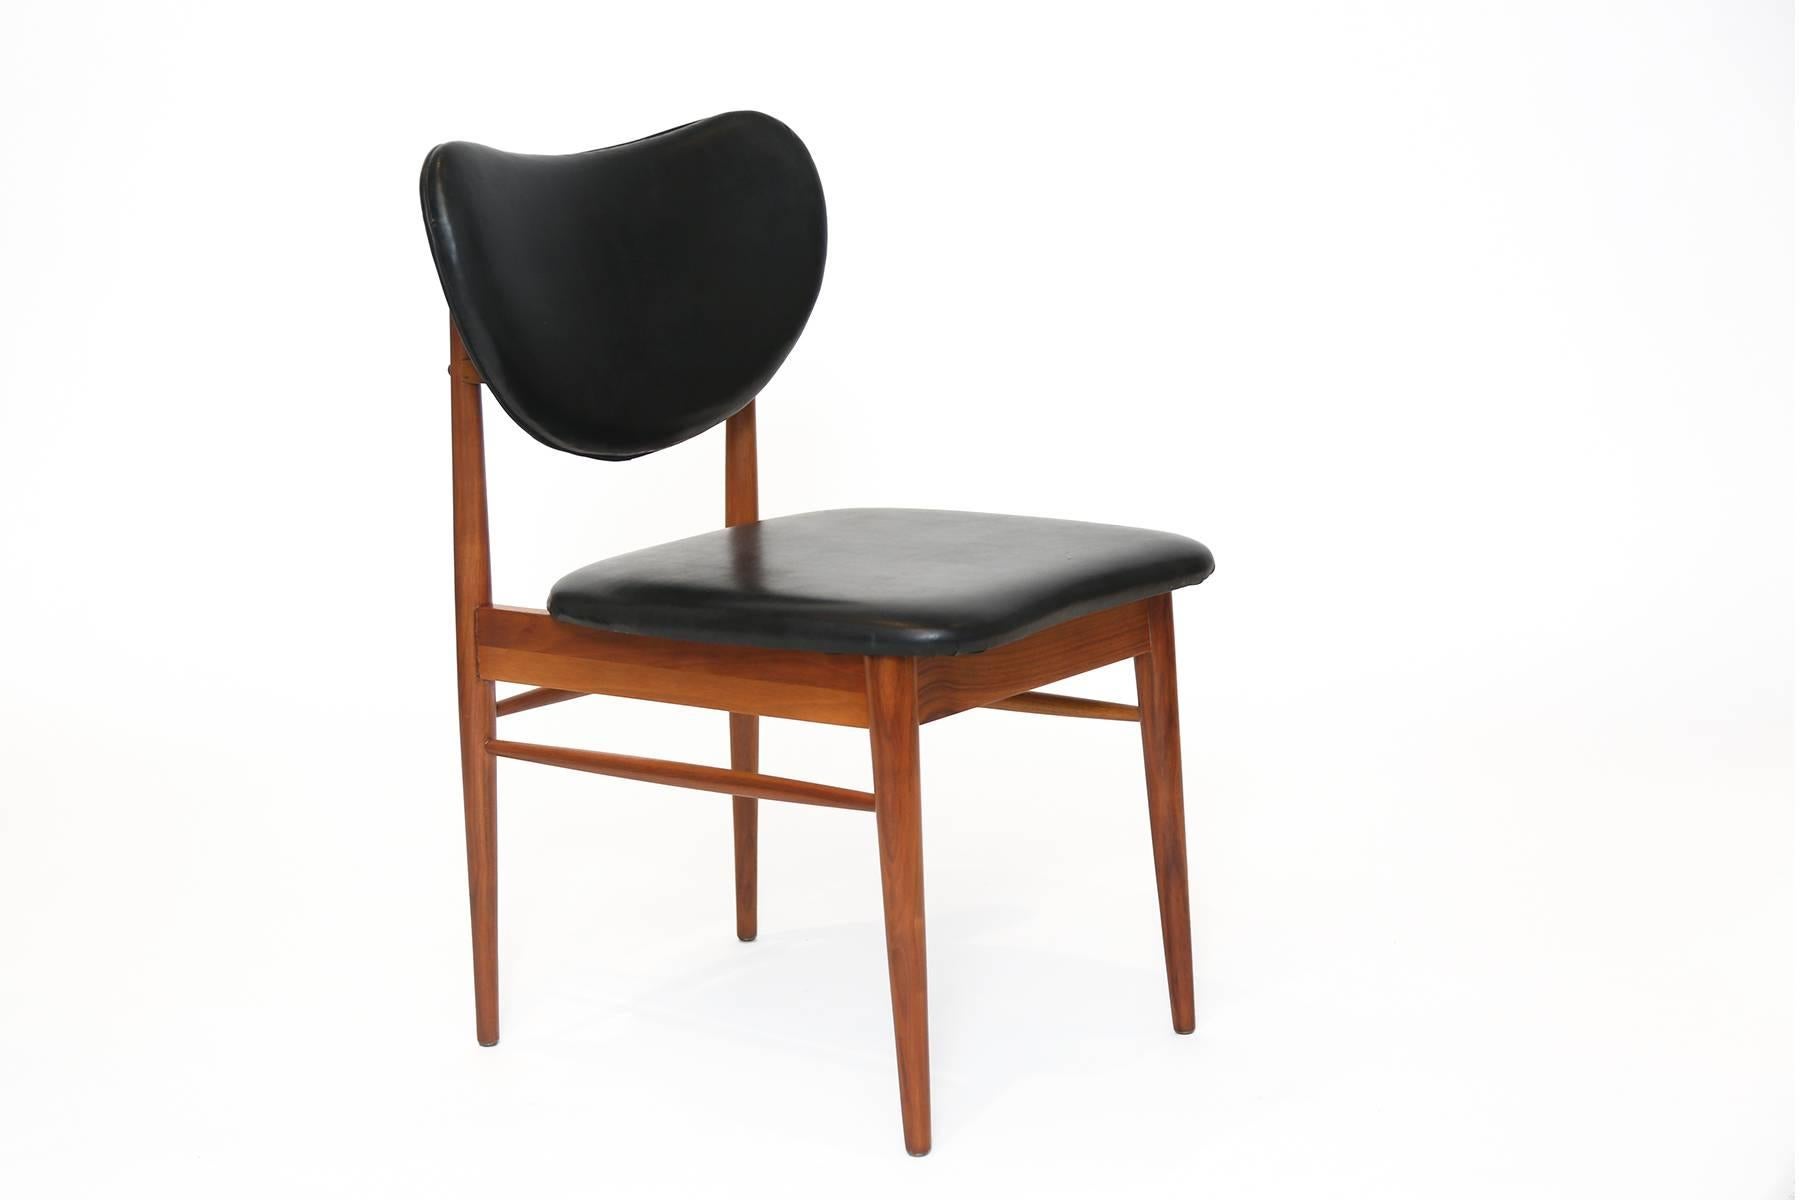 Sculptural walnut and upholstered occasional chair after Finn Juhl. This solid walnut example has tapered solid walnut legs and stretchers and subtly curved back handle. It has been impeccably refinished and retains its original black vinyl